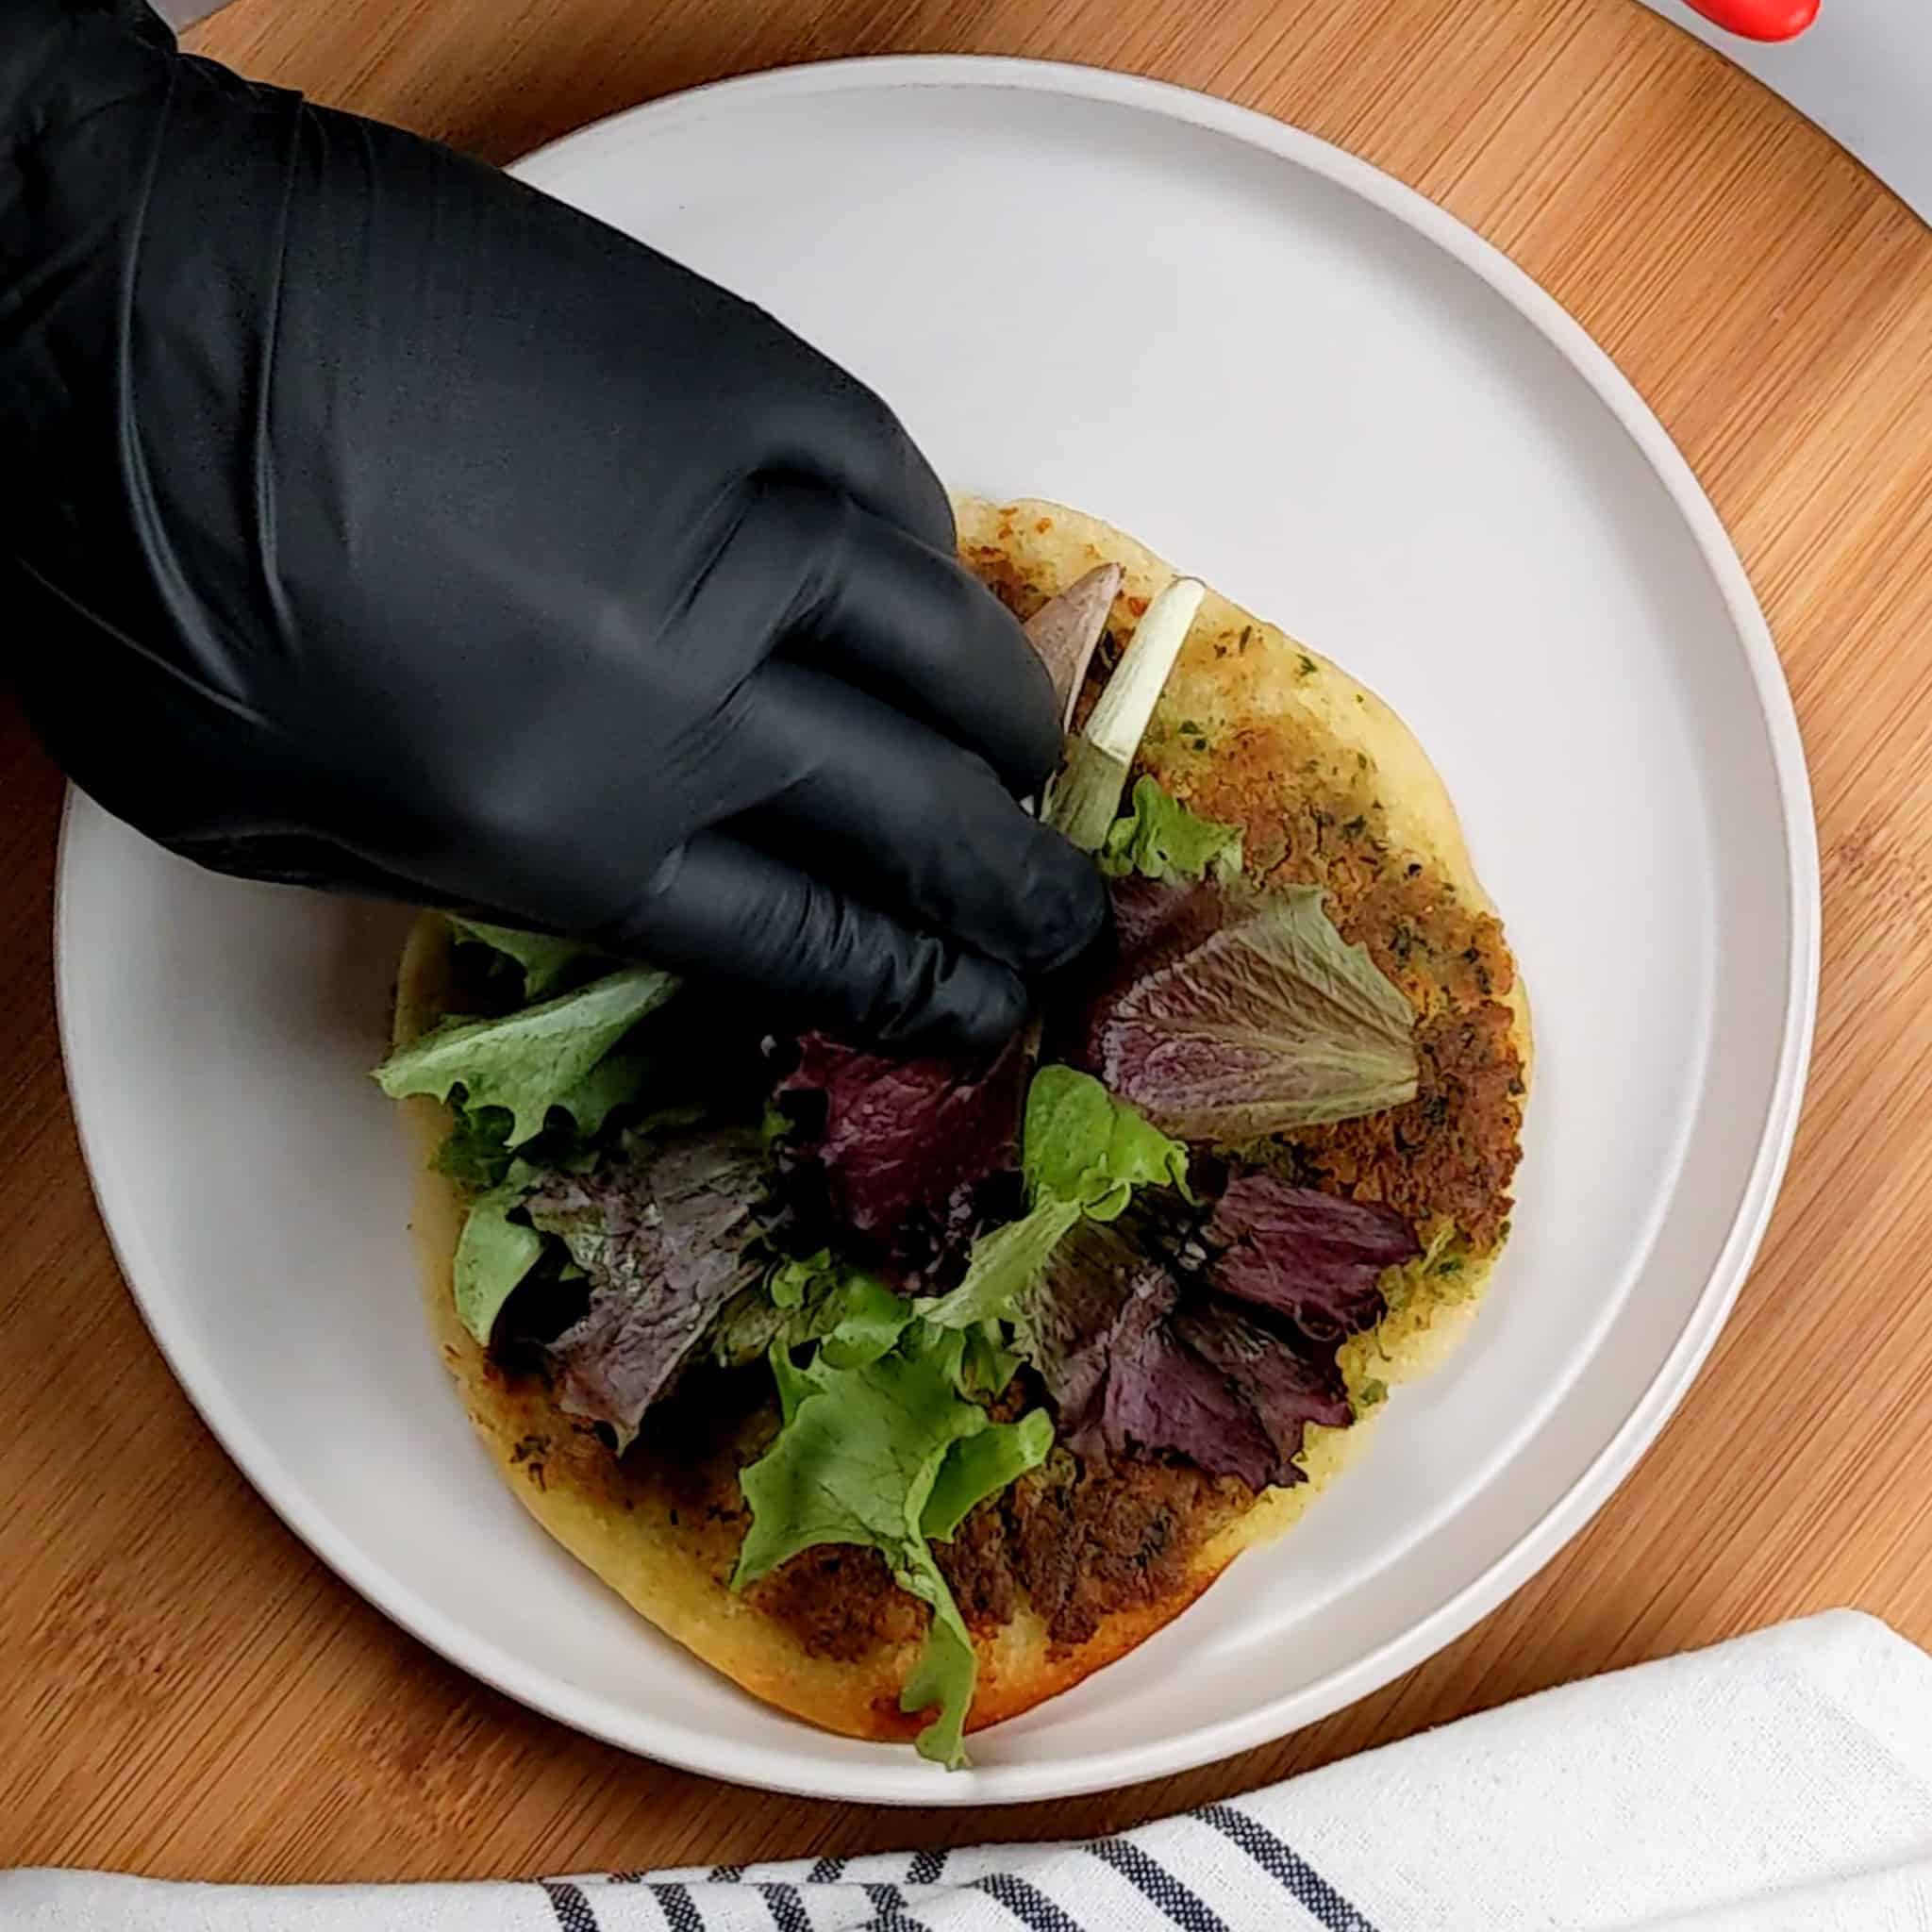 fresh mixed greens being added by a gloved hand to the top of the pita's falafel side on a round plate that is on a lazy susan next to a kitchen towel.